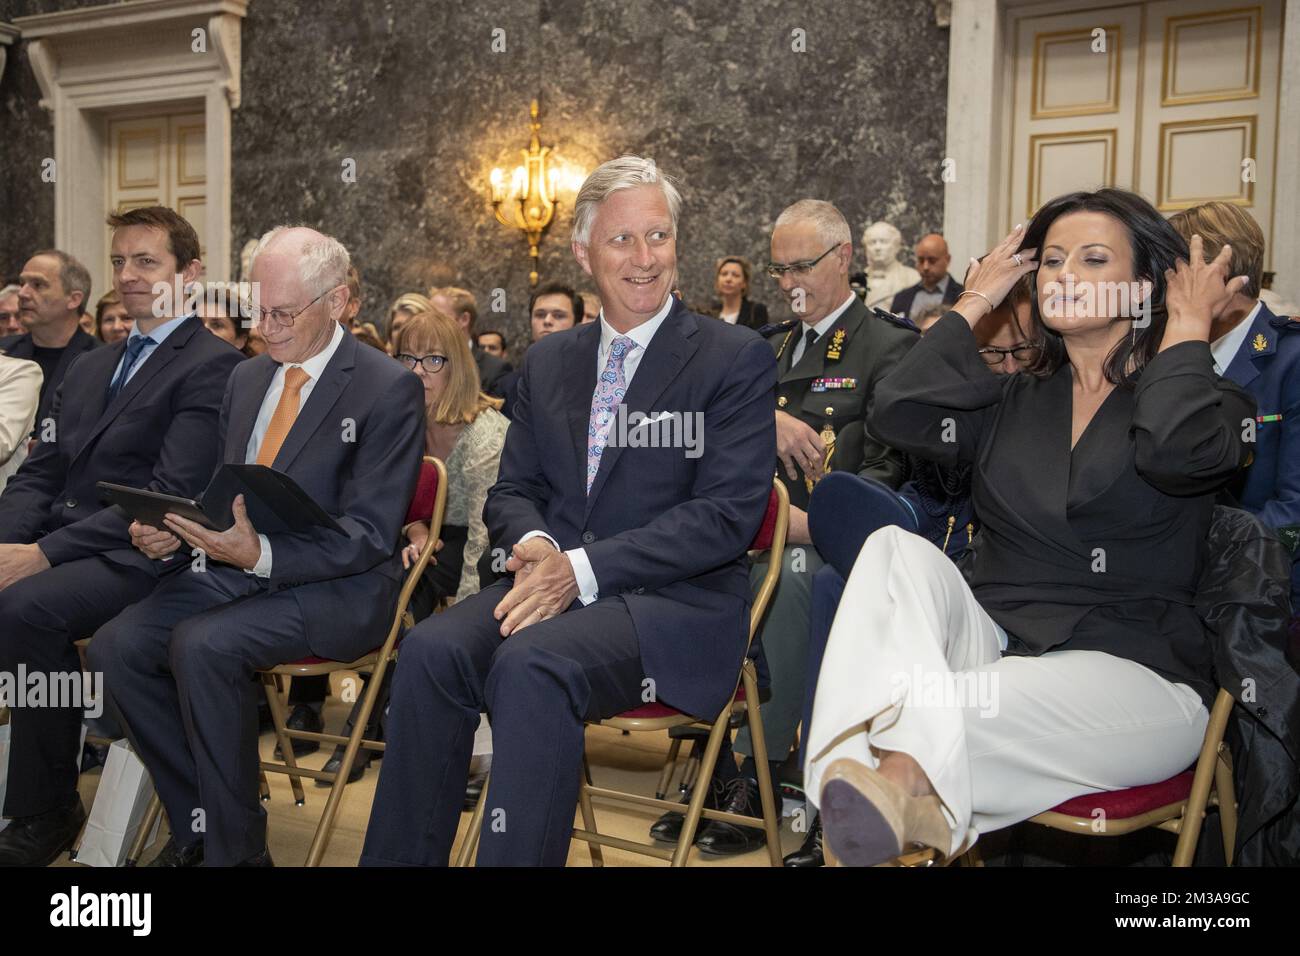 CD&V's senator Peter Van Rompuy, King Philippe - Filip of Belgium and Senate chairwoman Stephanie D'Hose pictured during a ceremony to award the 'Francqui Prize' scientifi awards for 2021 and 2022, Wednesday 01 June 2022 in Brussels. The 2021 prize is awarded to ULiege astrologist Michael Gillon, ULiege's Veerle Rots will receive the 2022 one for her Palaeolithic Stone Tool Hafting research. The scientific prize, which is often referred to as the 'Belgian Nobel Prize', is awarded by The Francqui Foundation and is worth 250.000 euros. BELGA PHOTO NICOLAS MAETERLINCK Stock Photo